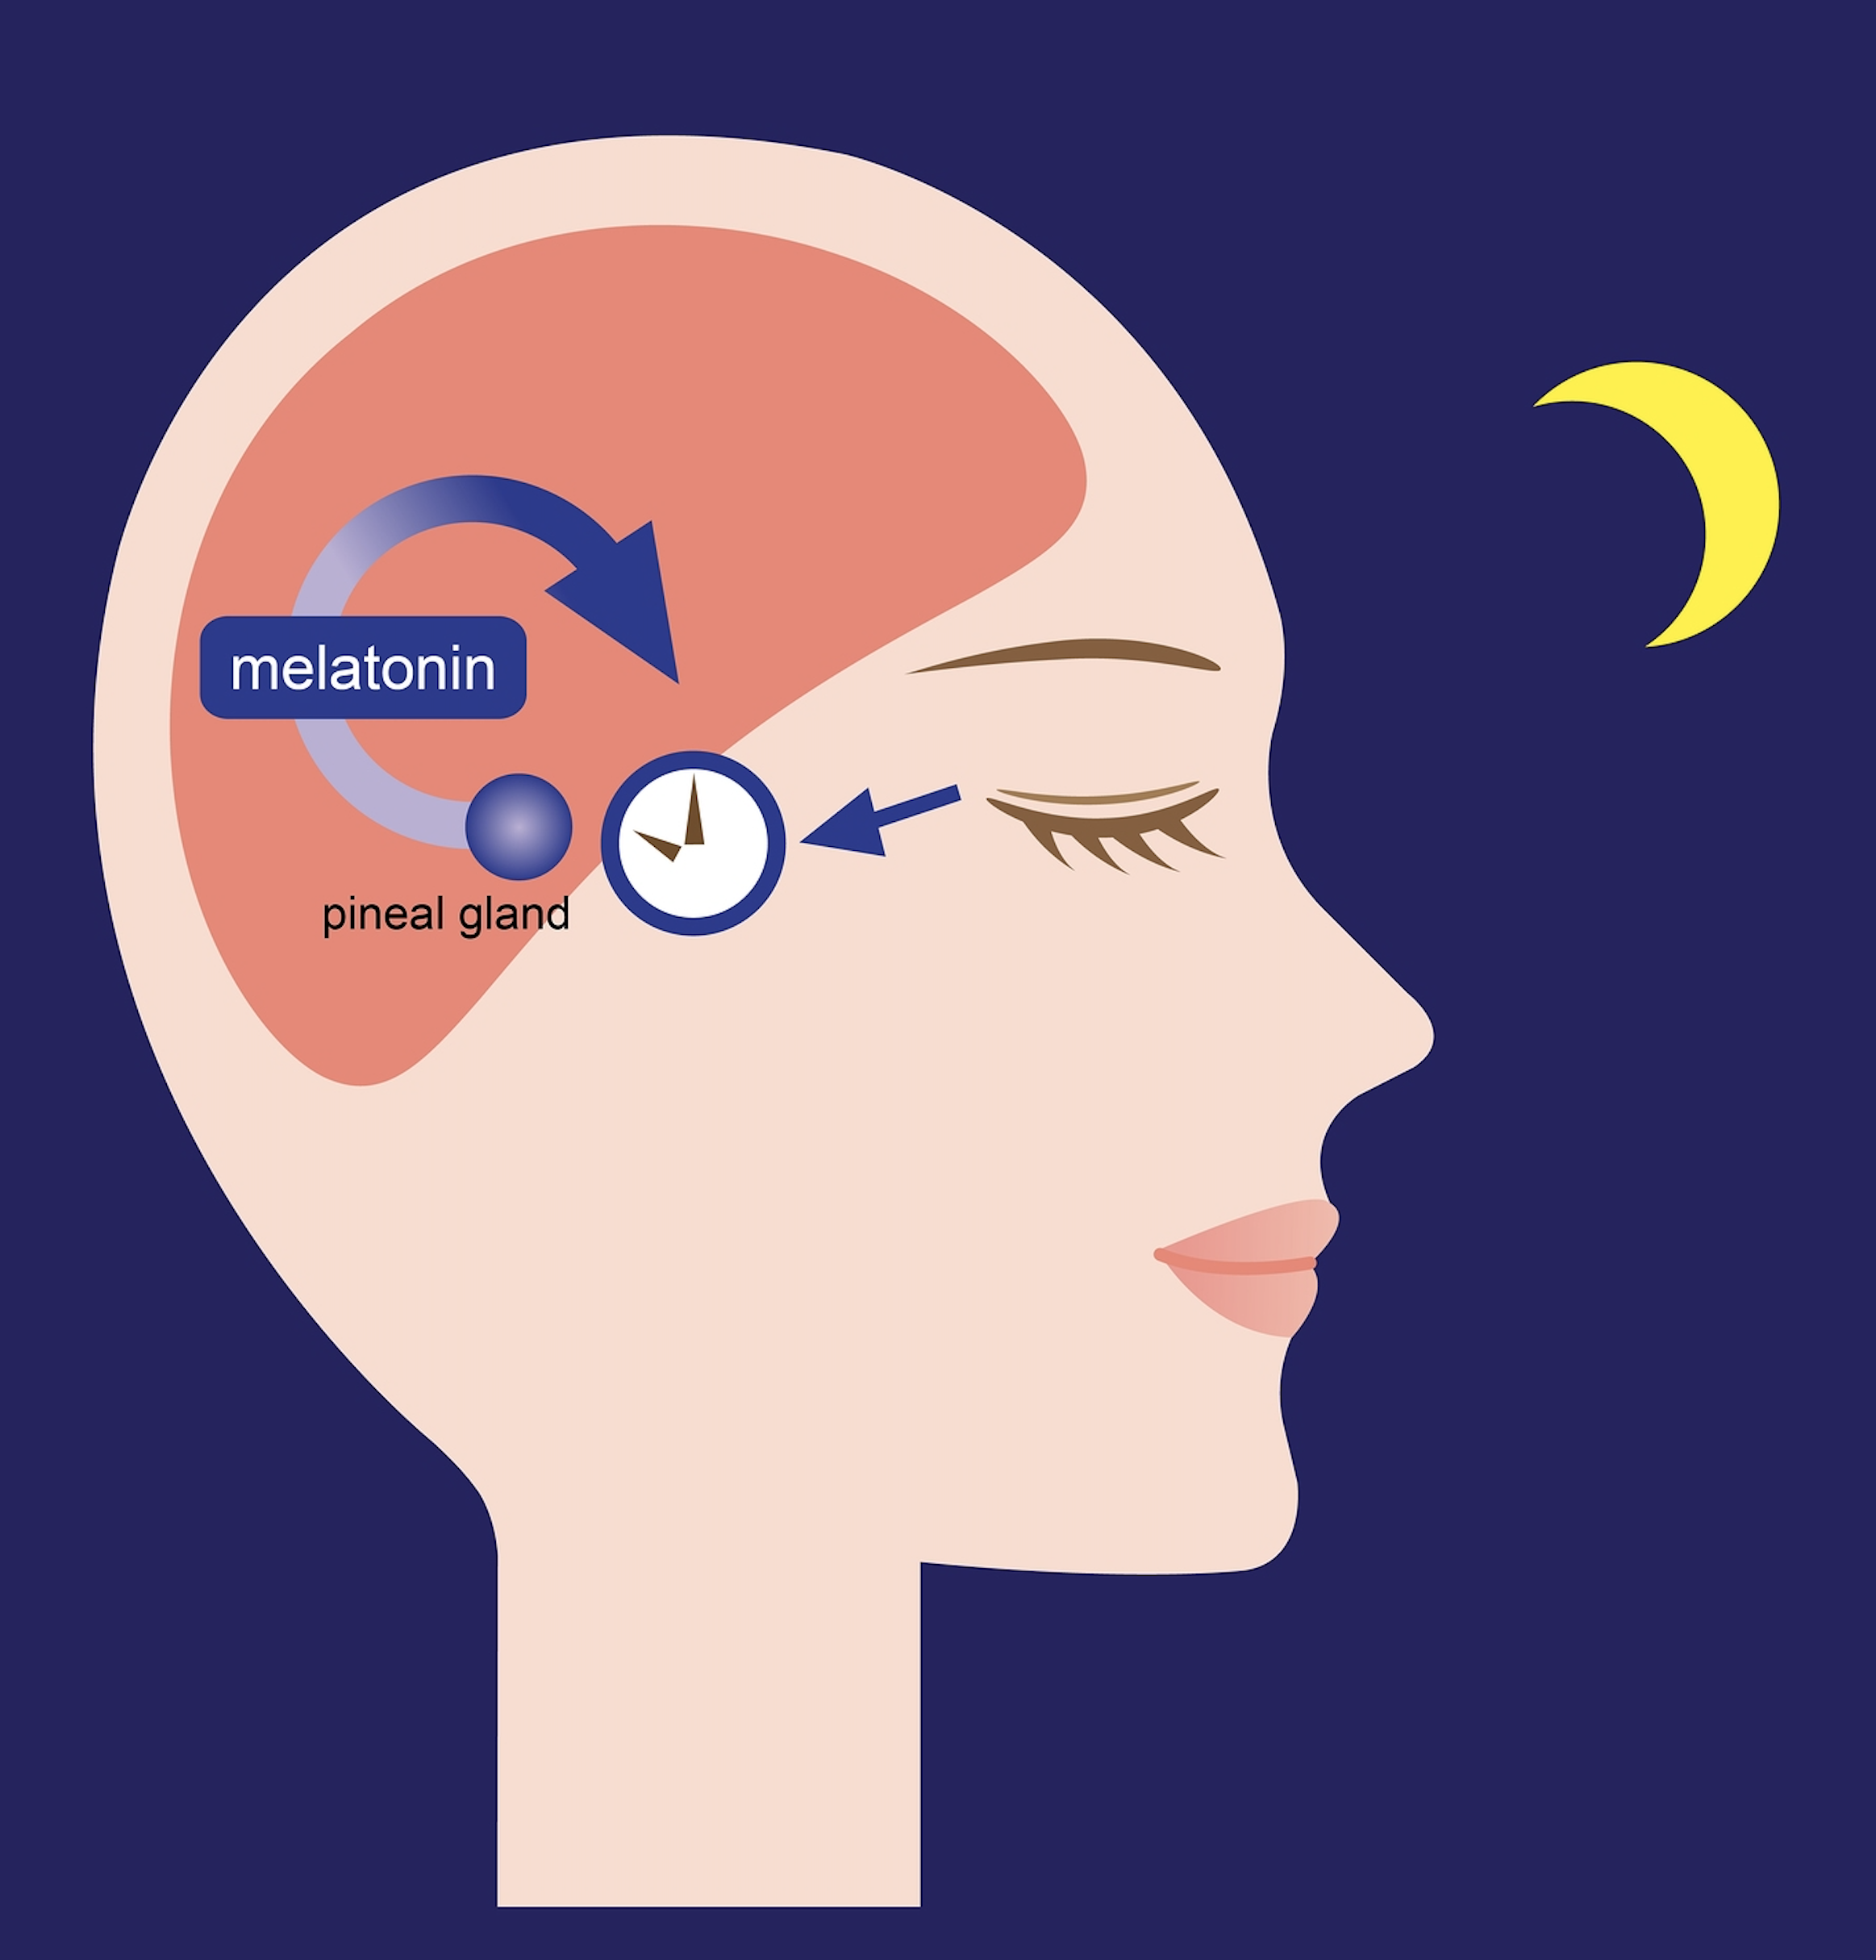 How Much Melatonin Can You Take Safely? The Natural Sleep ...